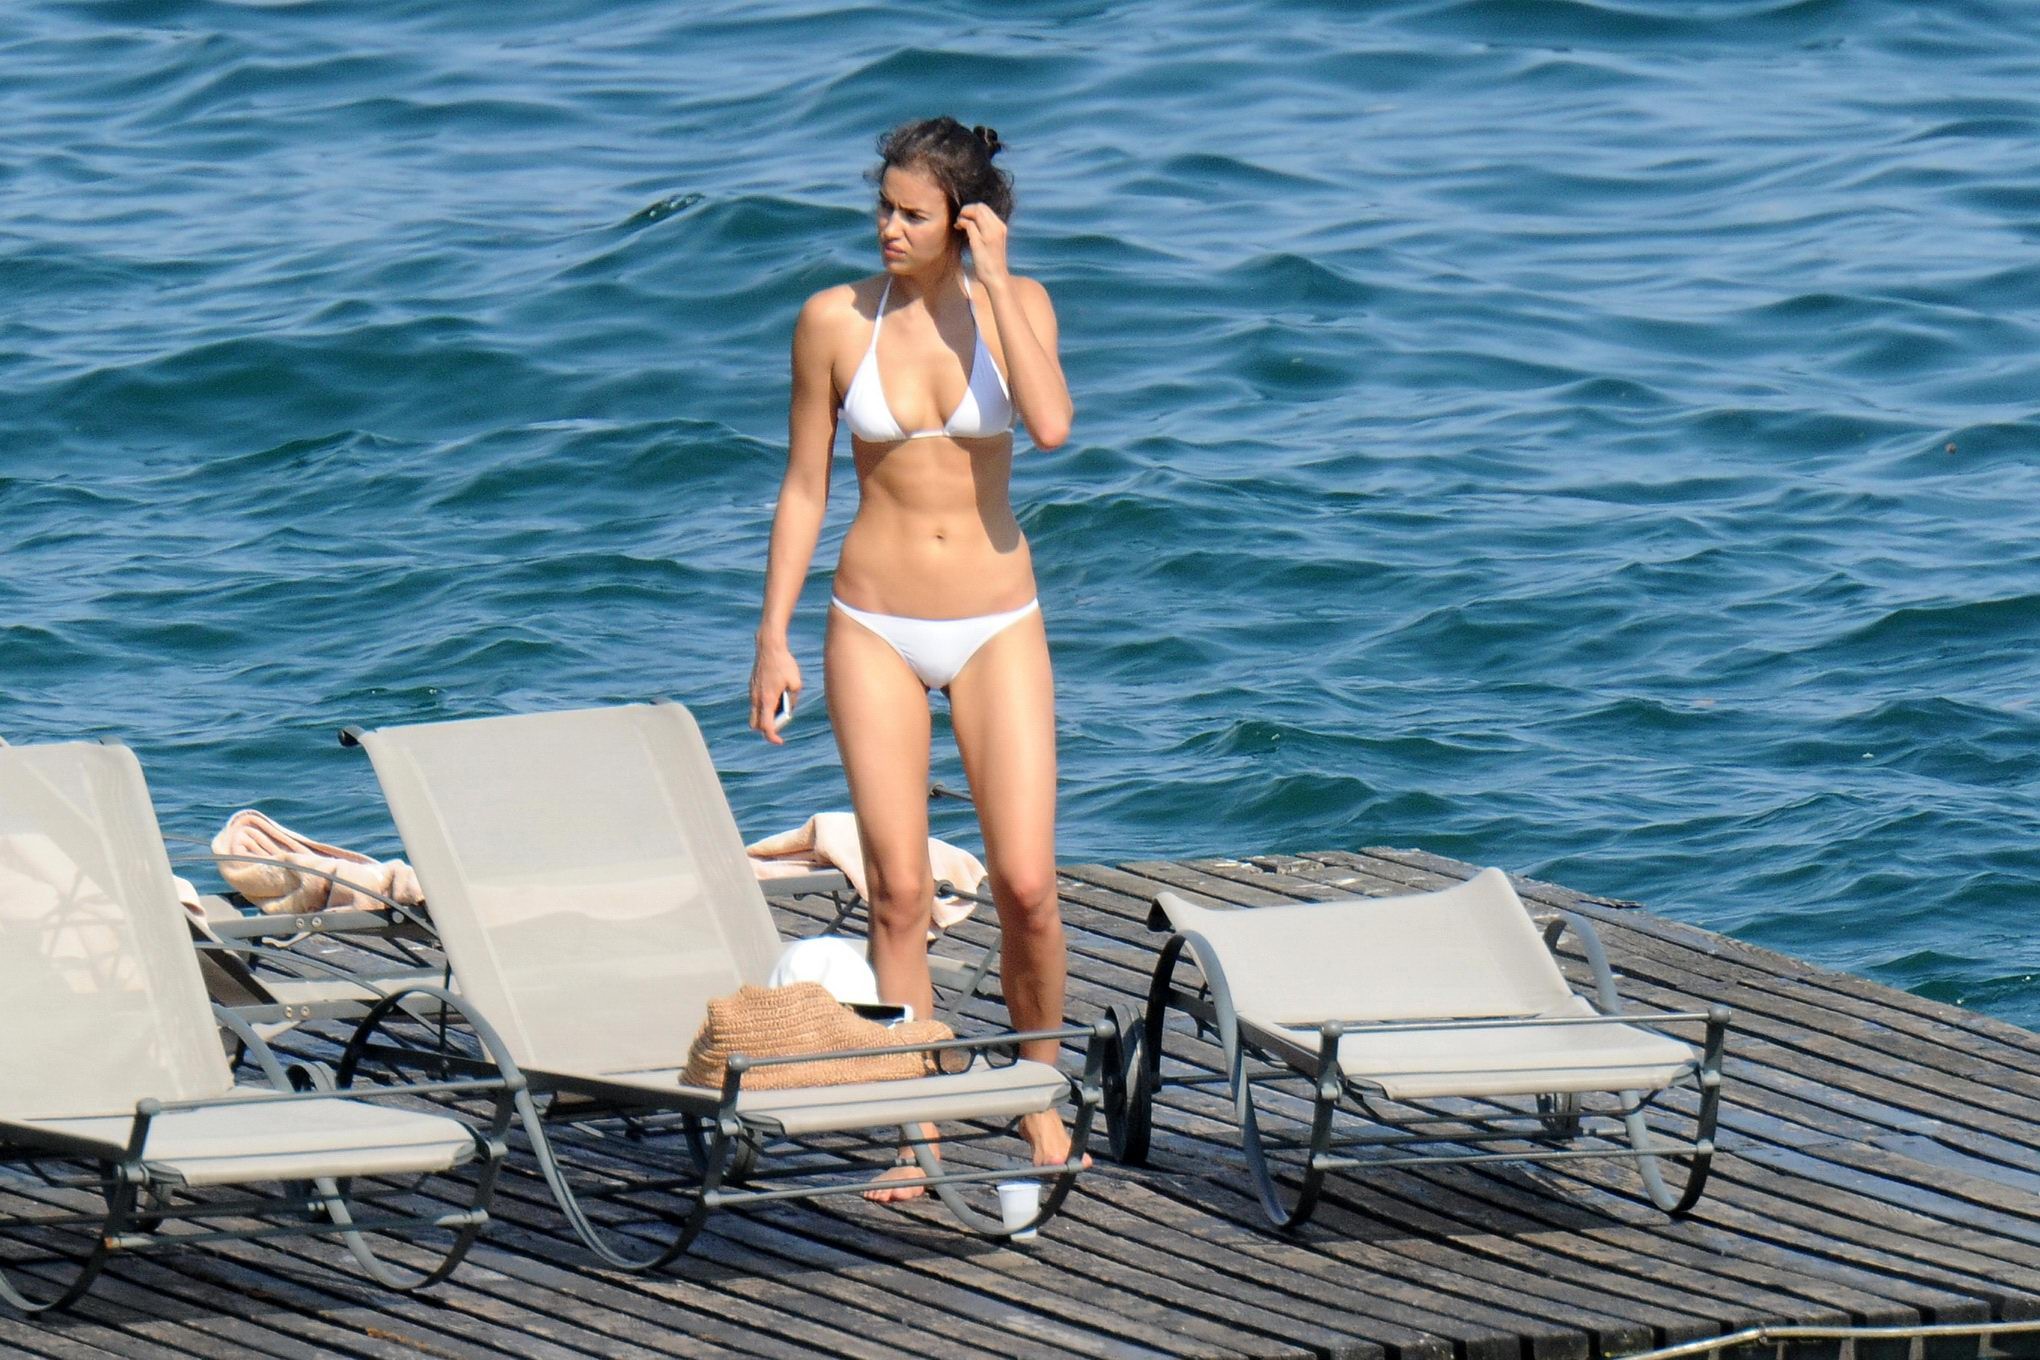 Irina Shayk Showing Off Her Bikini Body In Italy Porn Pictures Xxx Photos Sex Images 3230036